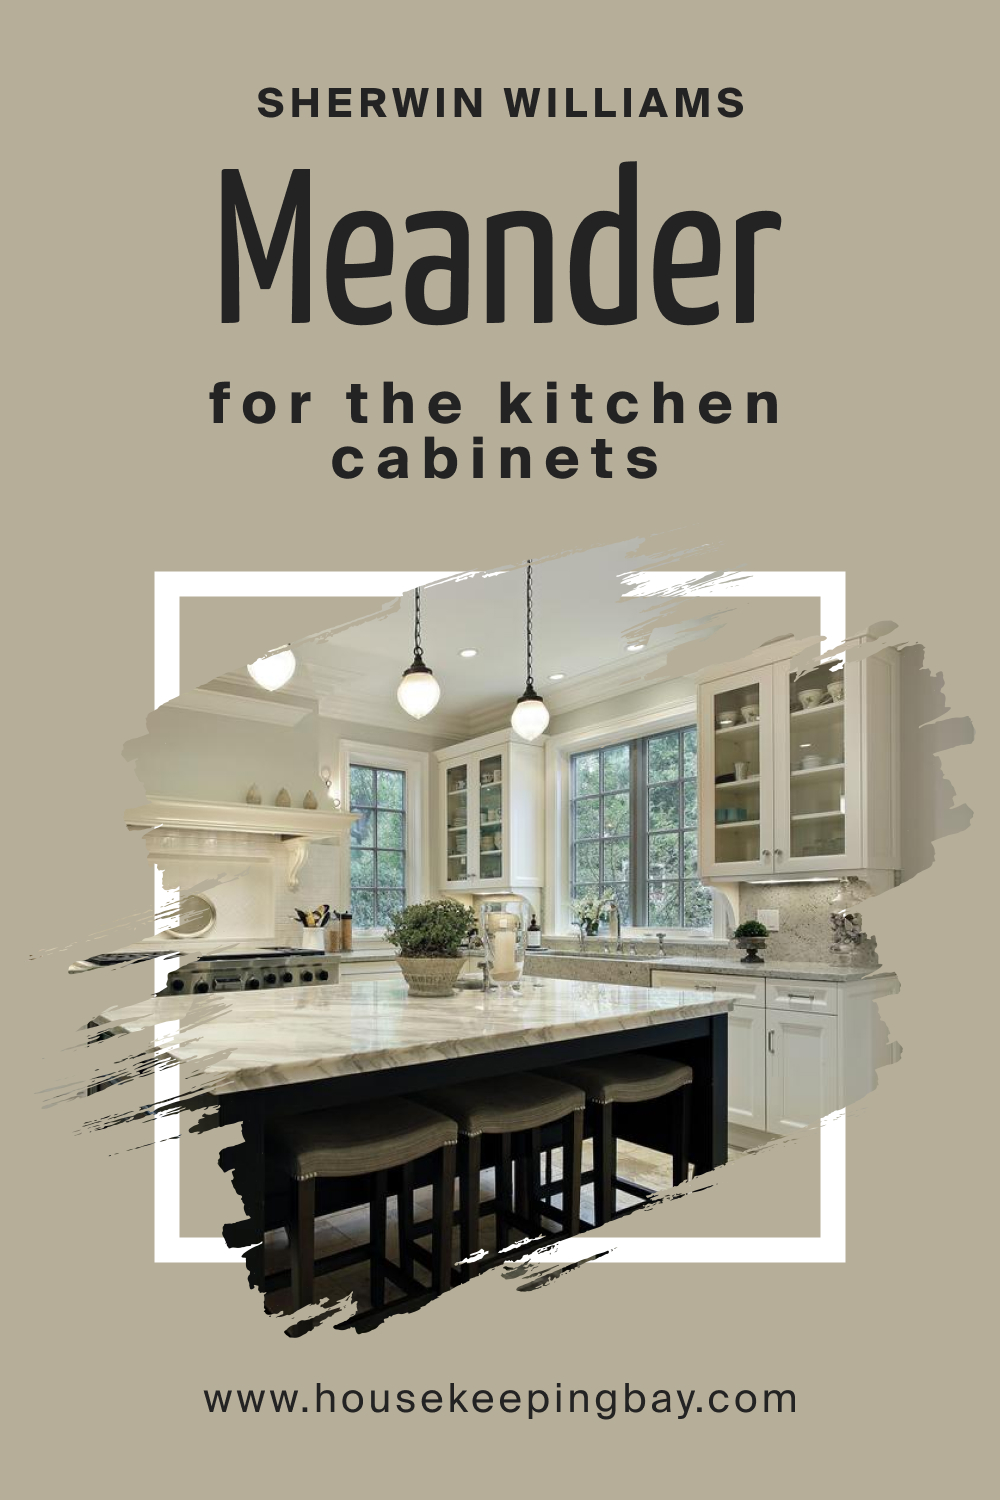 Sherwin Williams. SW 9522 Meander For the Kitchen Cabinets